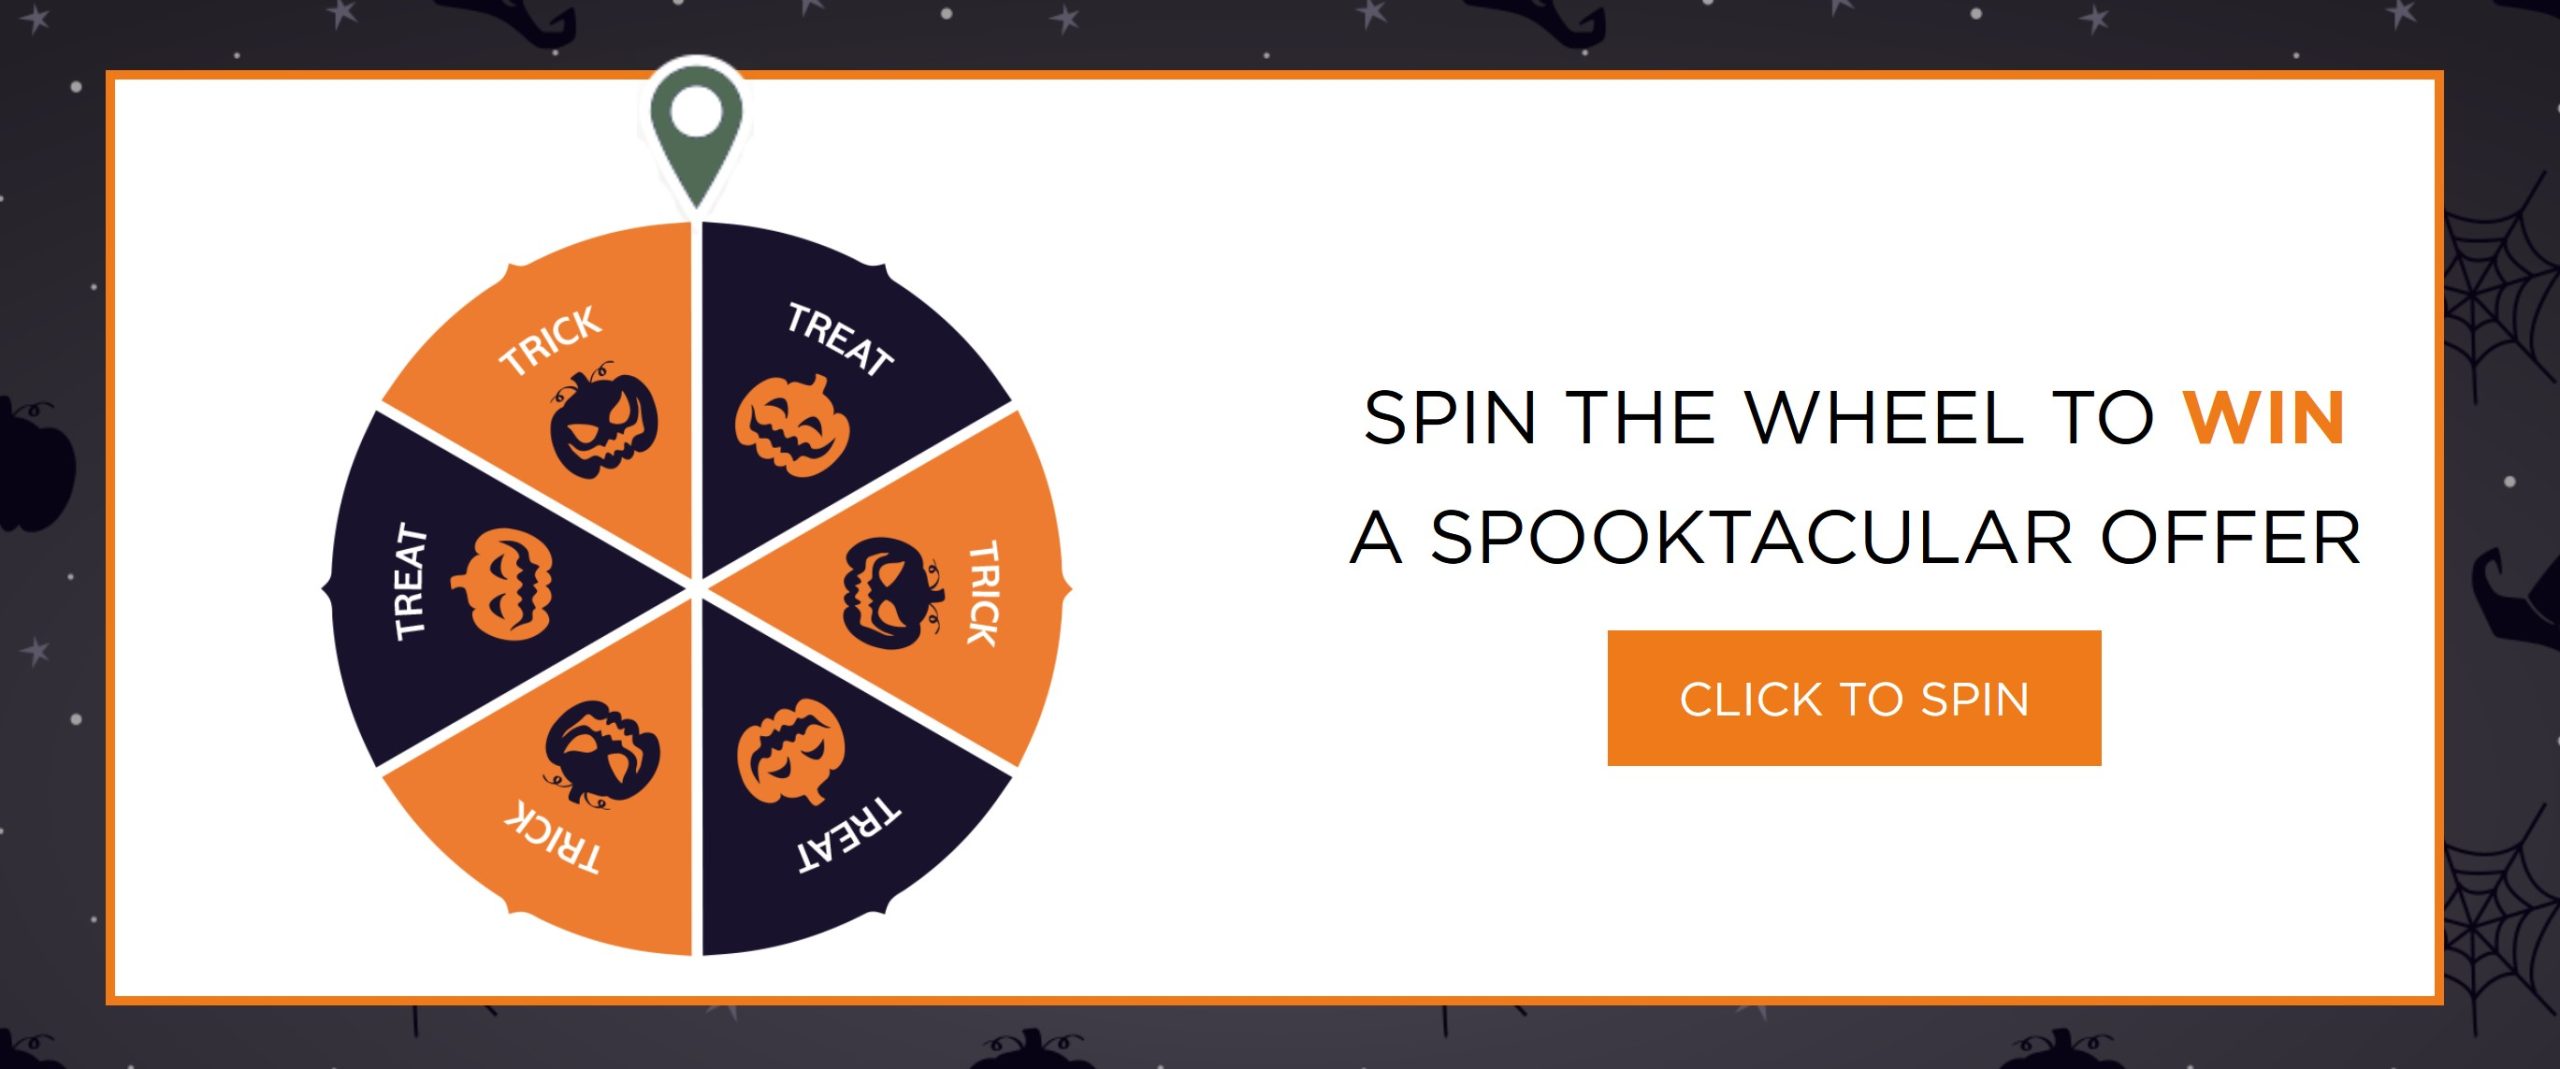 Spin the to win offer at Loccitane